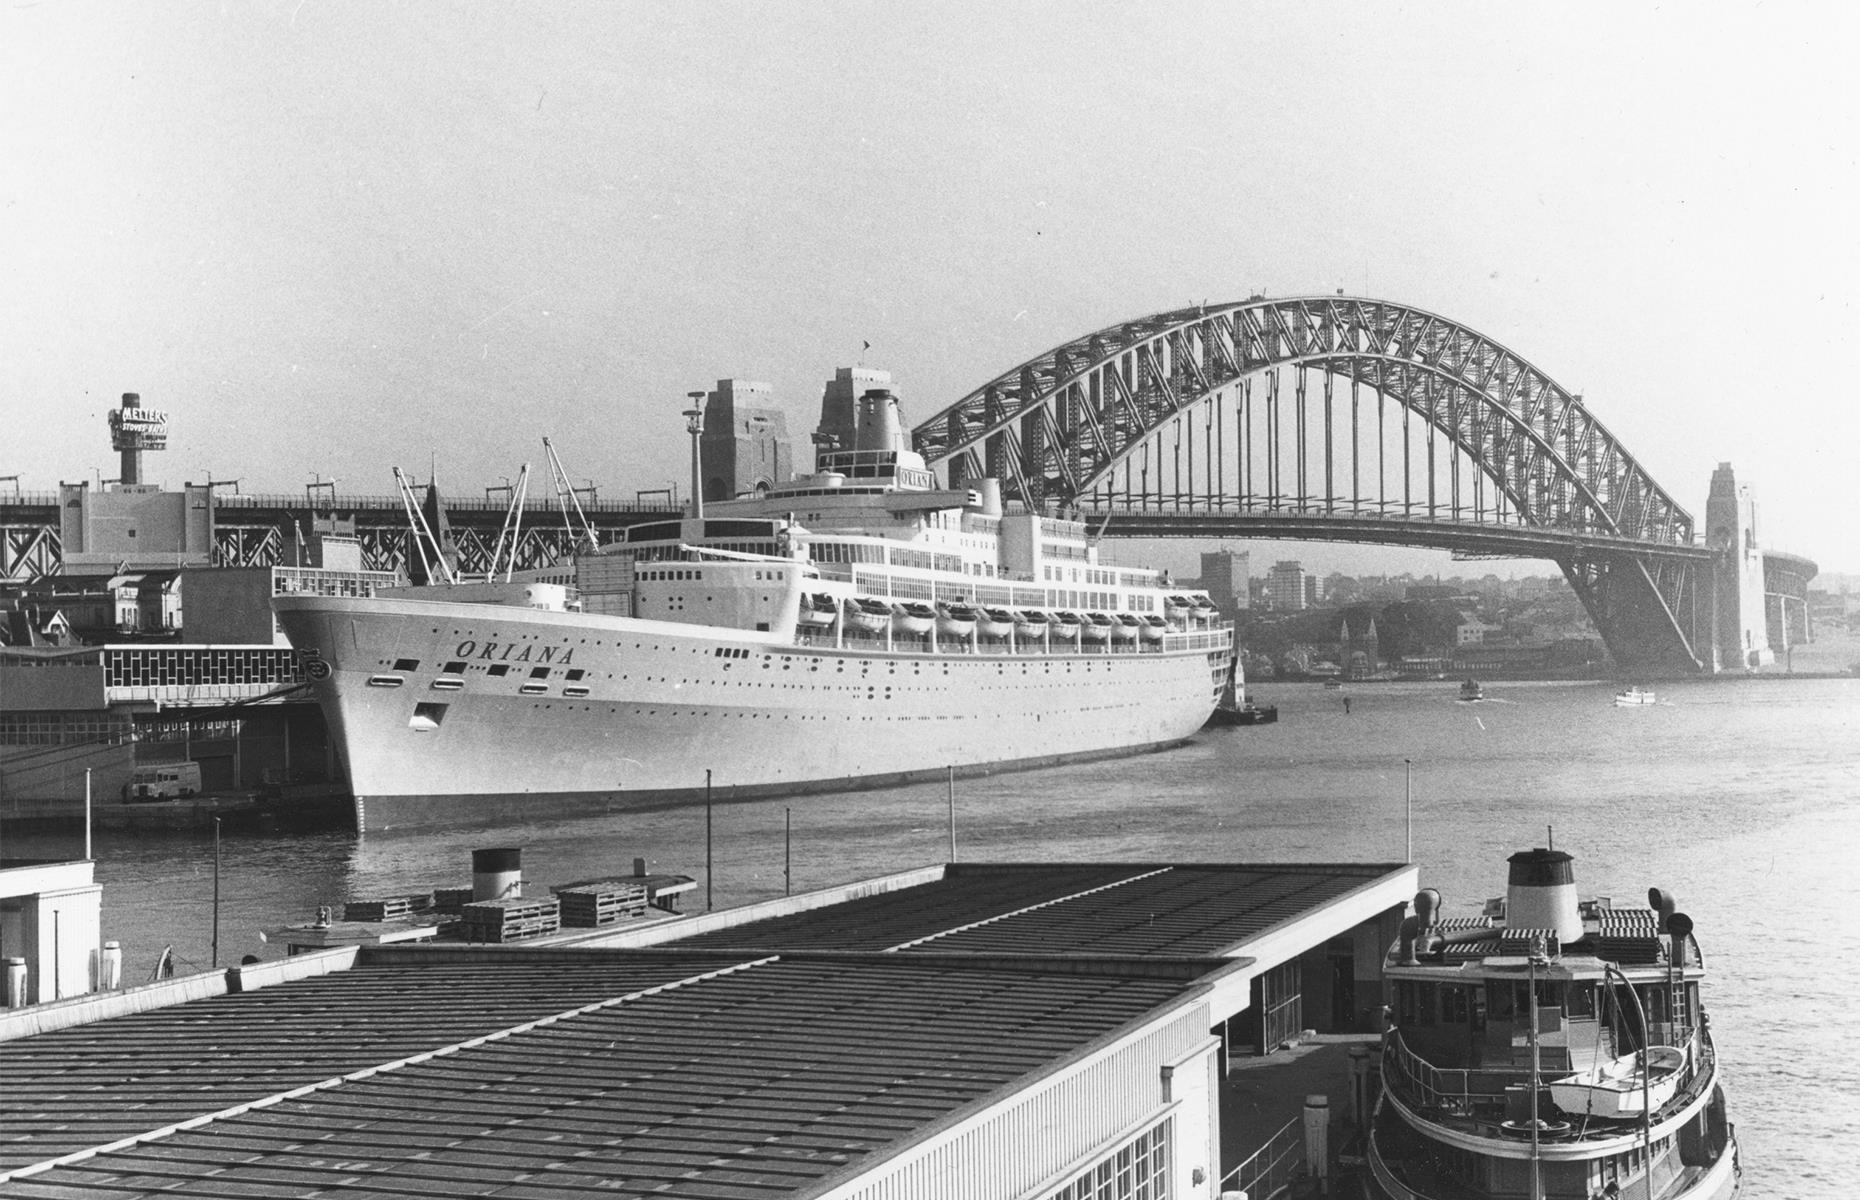 There was one destination that proved particularly popular in the post-war decades, though. After the conflict, many Europeans decided to make a new life Down Under, with millions cruising to Oz on time-honored lines like P&O between the 1940s and the 1970s. P&O ship Oriana is pictured here in Circular Quay, Sydney circa 1950.